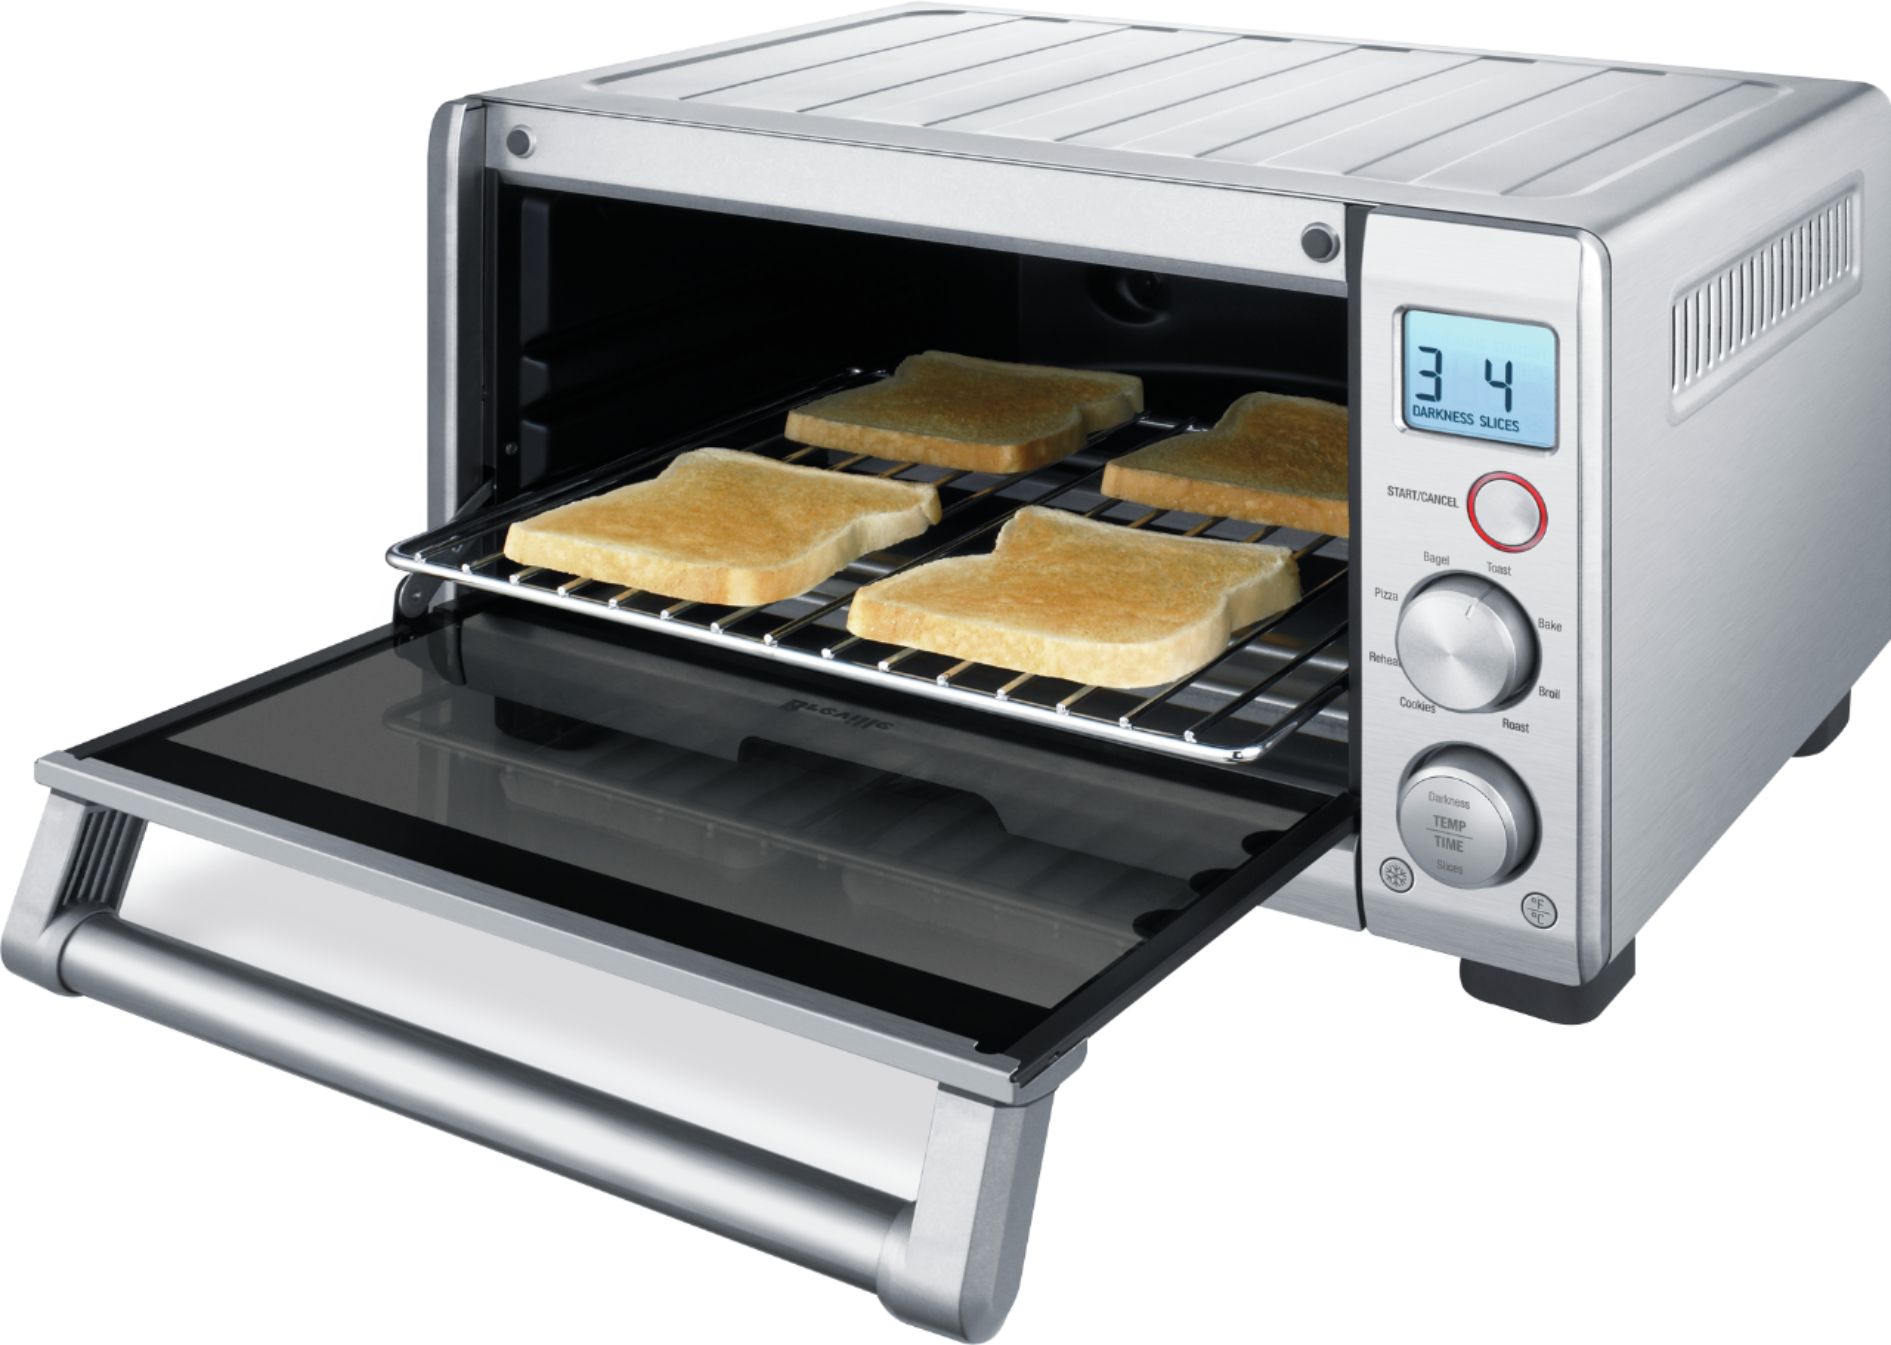 Breville Compact Smart Oven Toaster Oven + Reviews, Crate & Barrel